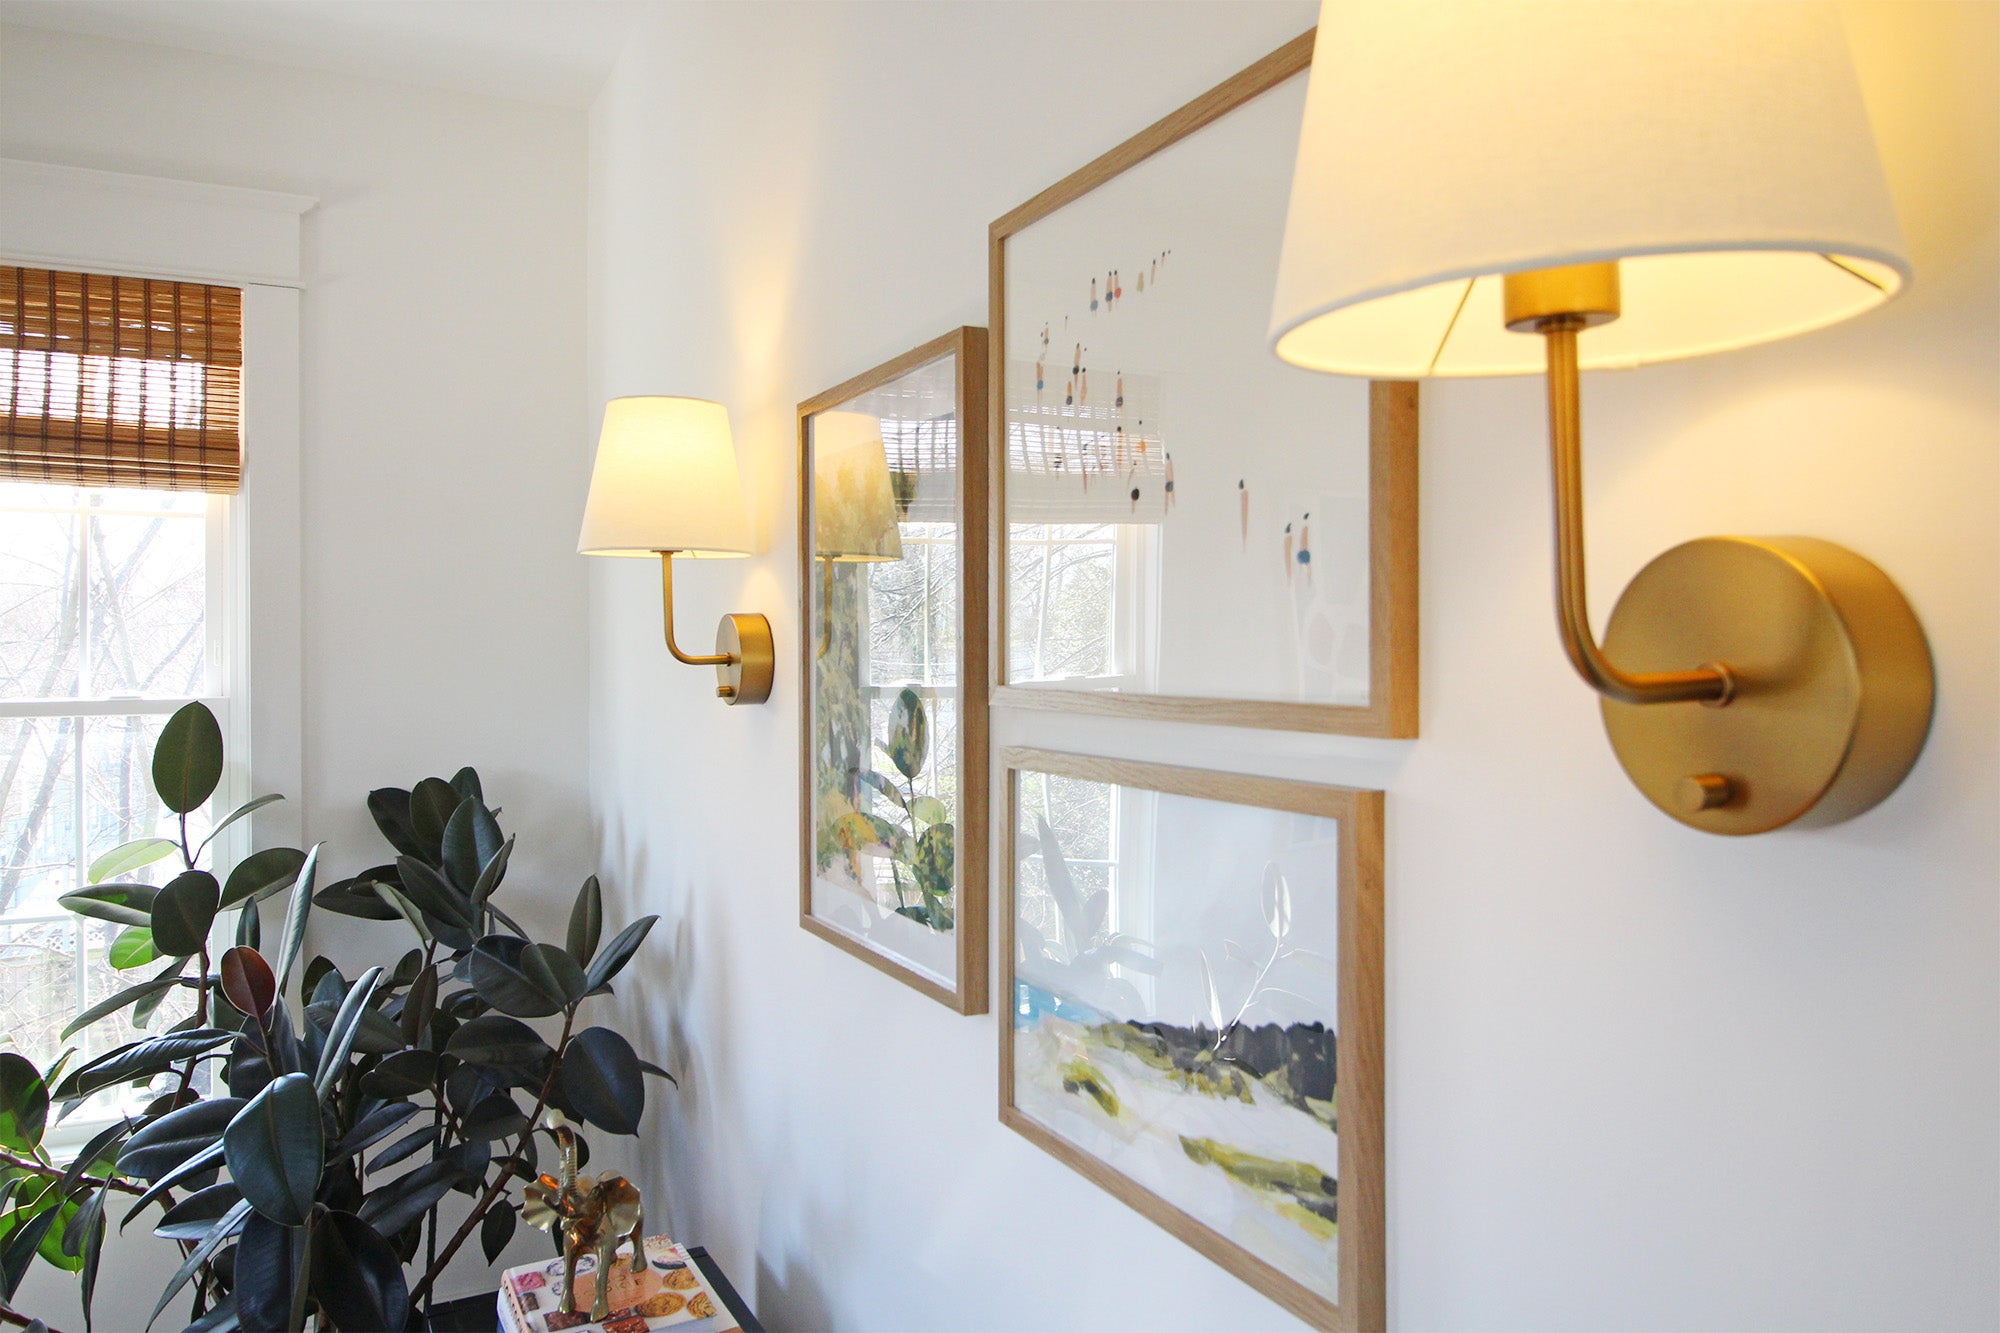 How Chaney at Mix and Match Design Company is Upgrading the Lighting in Her Home Office Design